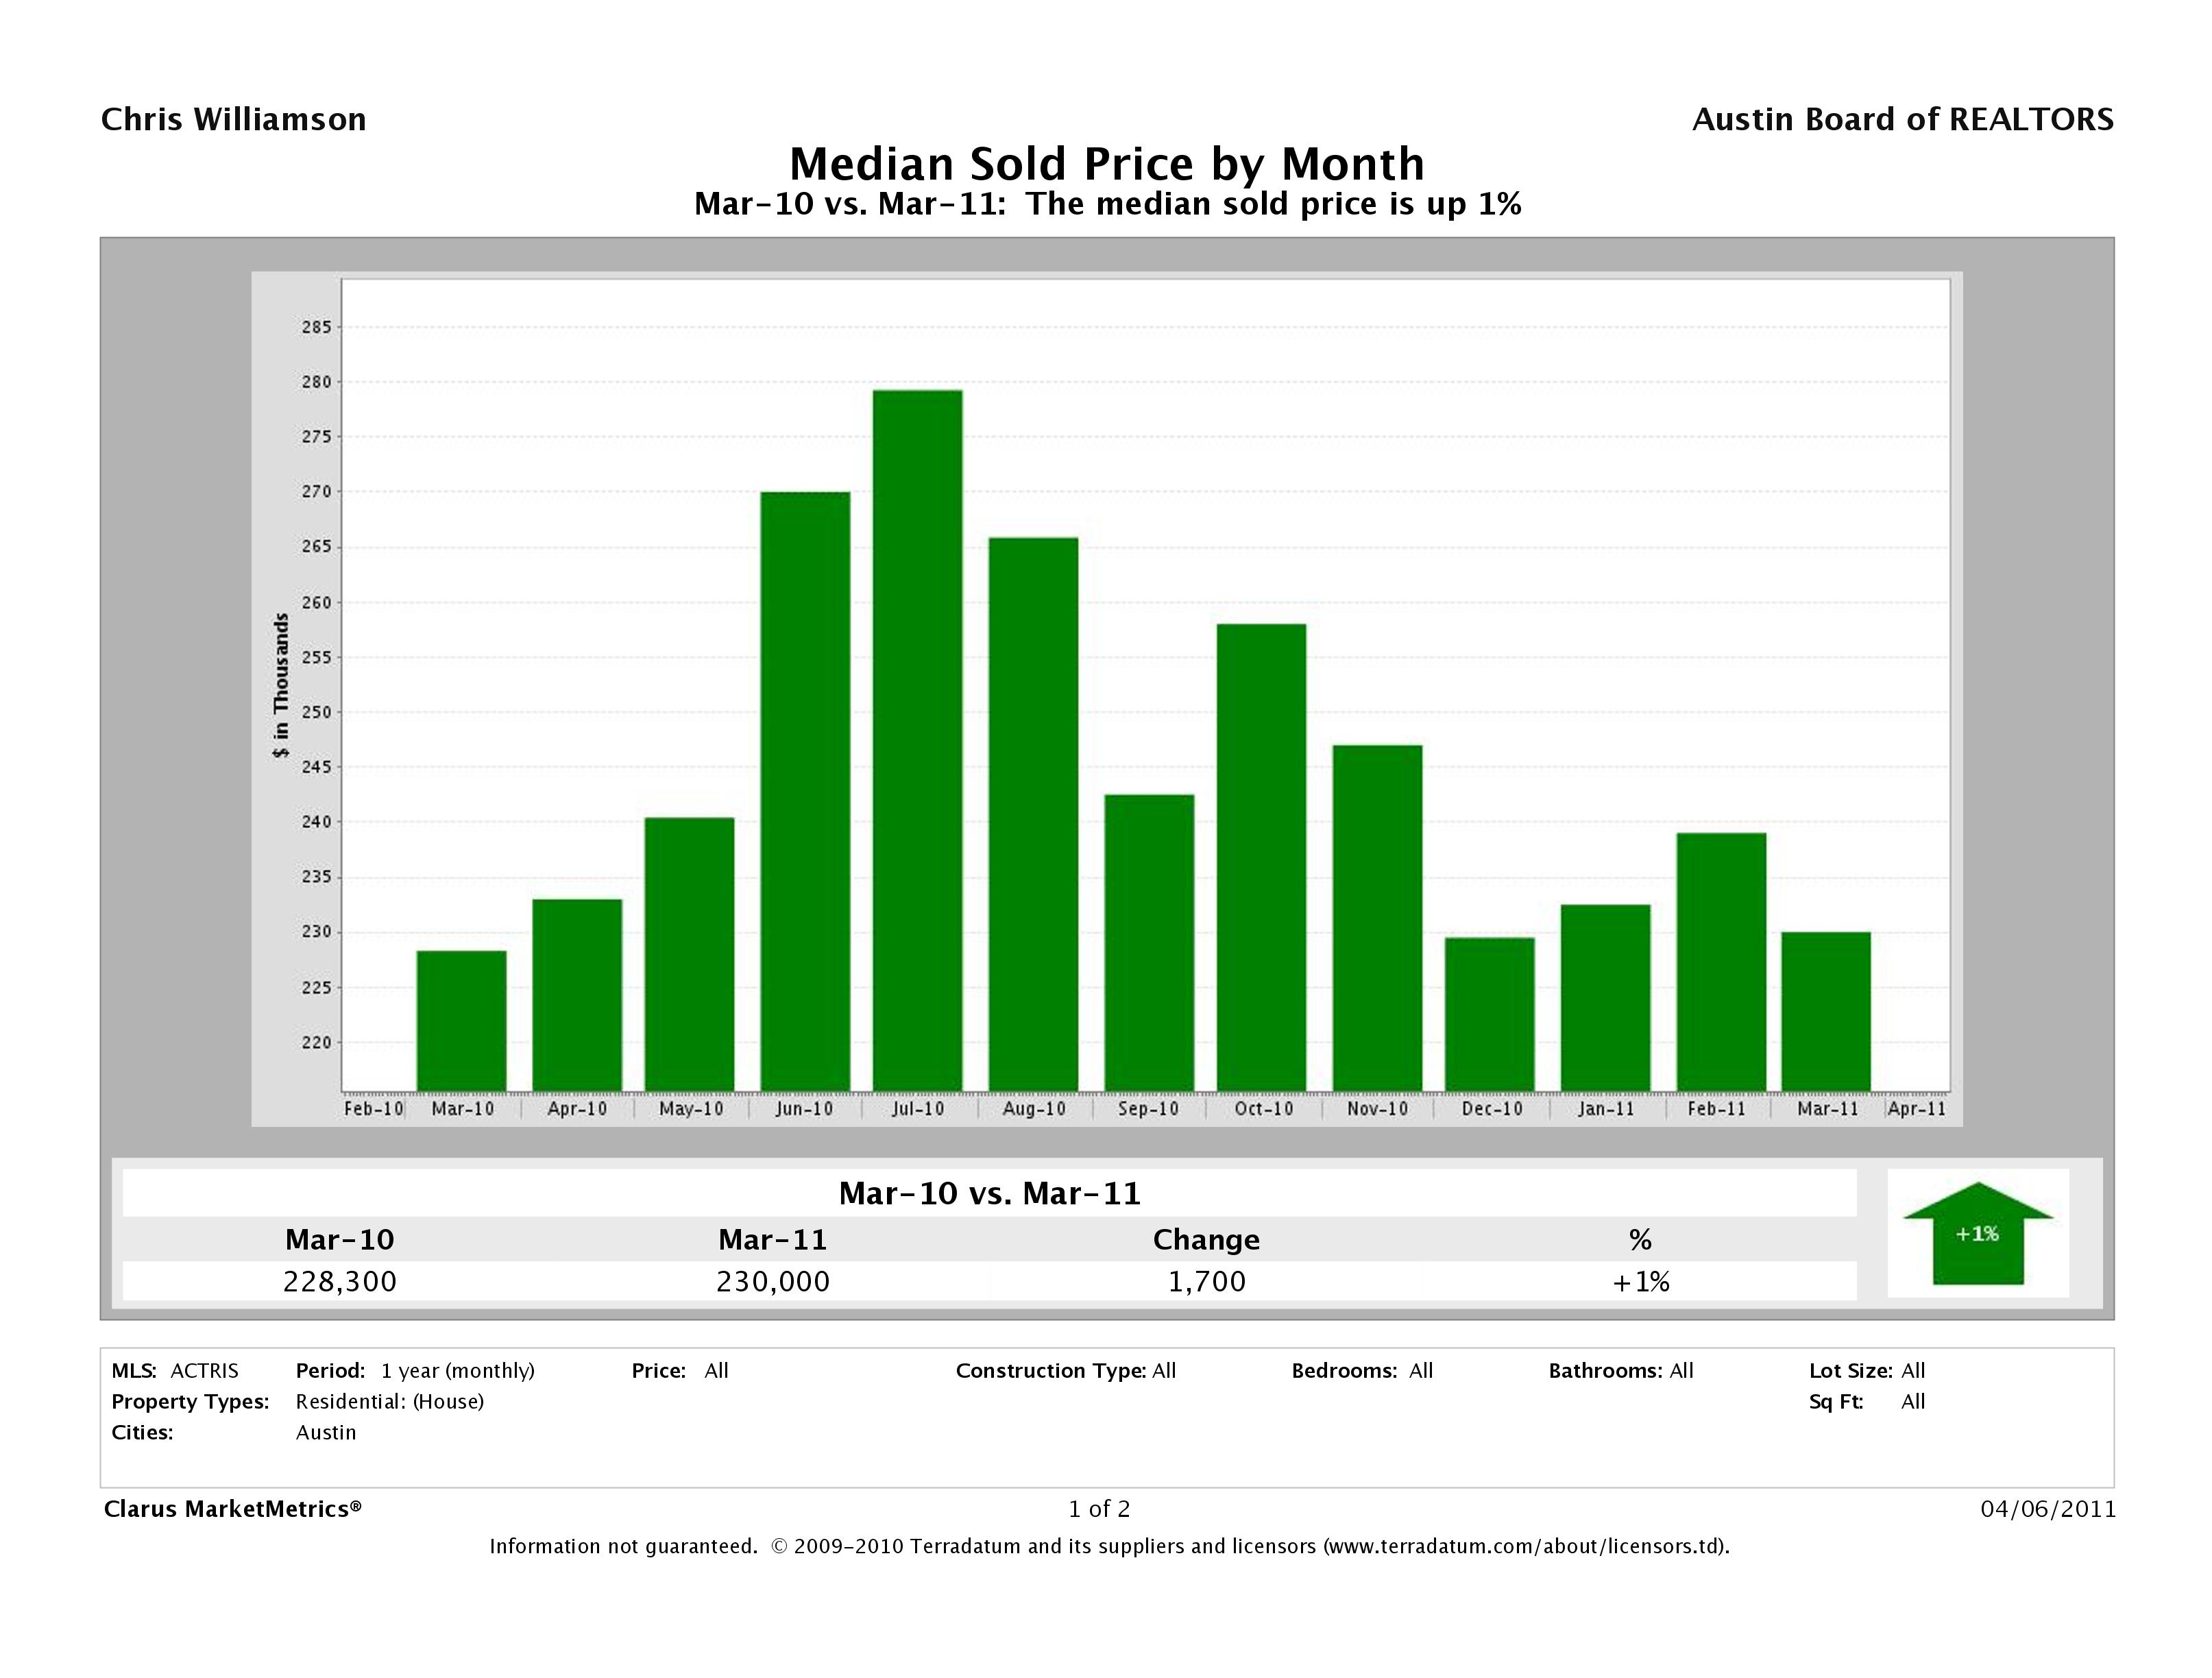 Austin median home price march 2011